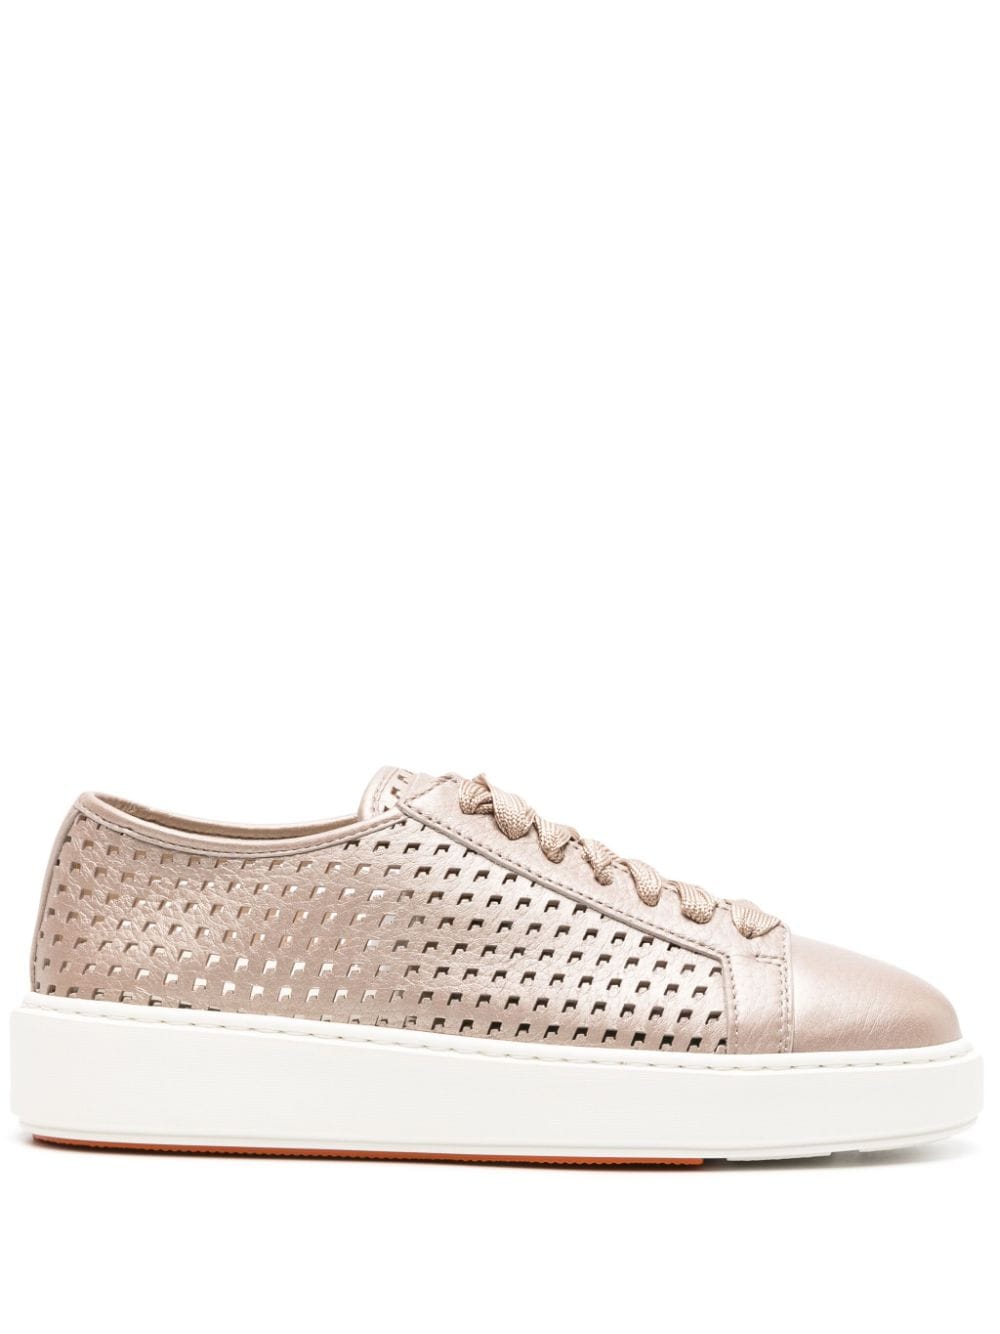 Santoni Perforated Leather Sneakers In Neutrals